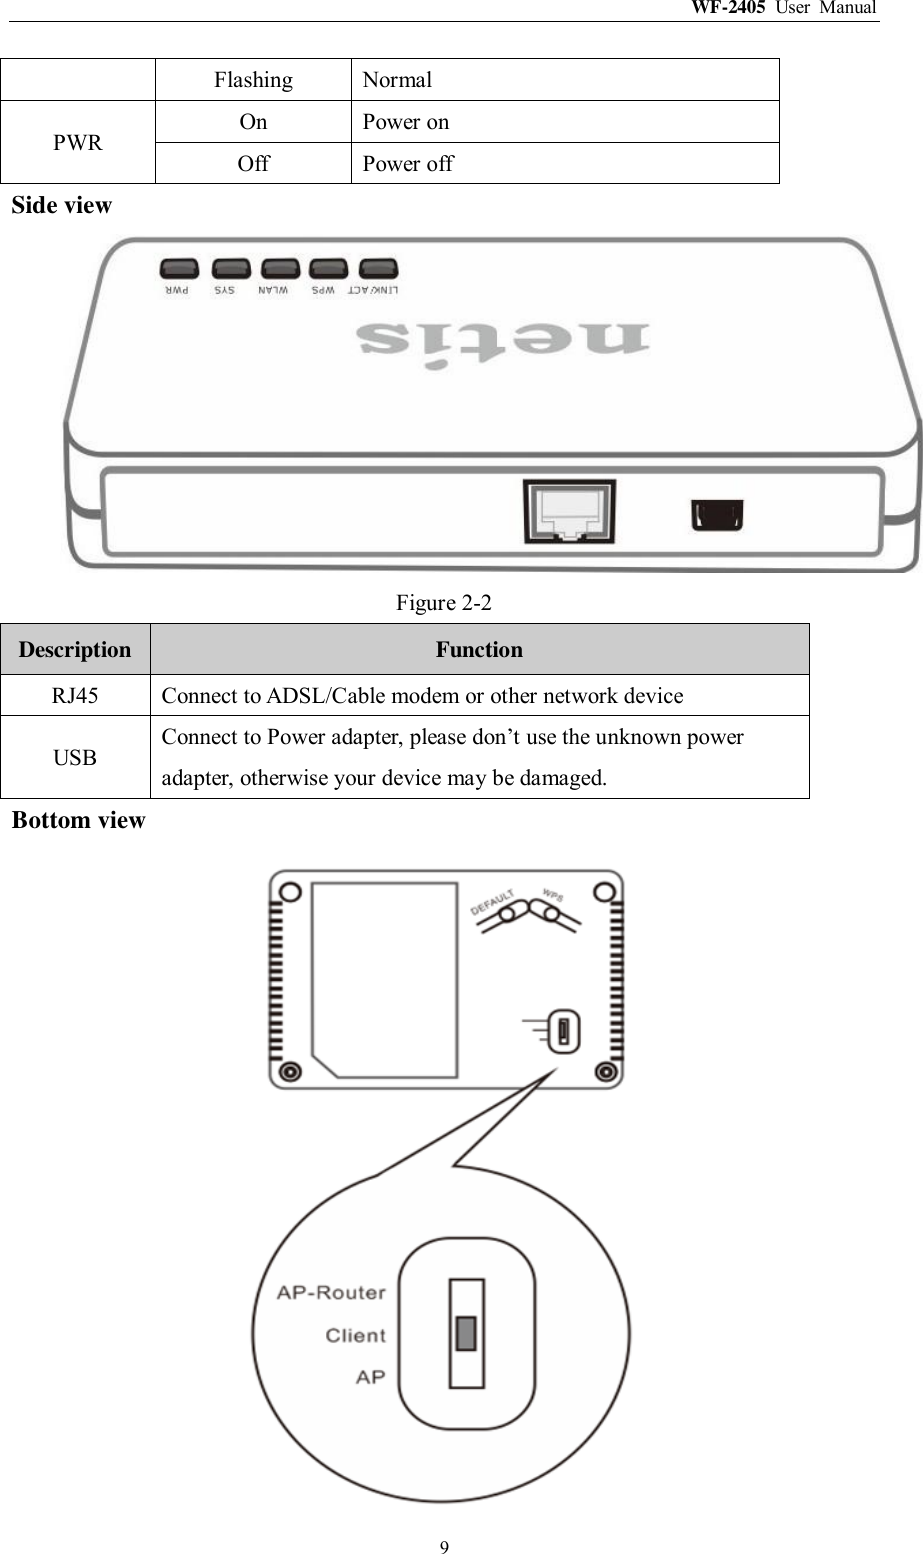 WF-2405  User  Manual  9 Flashing Normal PWR On Power on Off Power off Side view  Figure 2-2 Description Function RJ45 Connect to ADSL/Cable modem or other network device USB Connect to Power adapter, please don‟t use the unknown power adapter, otherwise your device may be damaged. Bottom view  